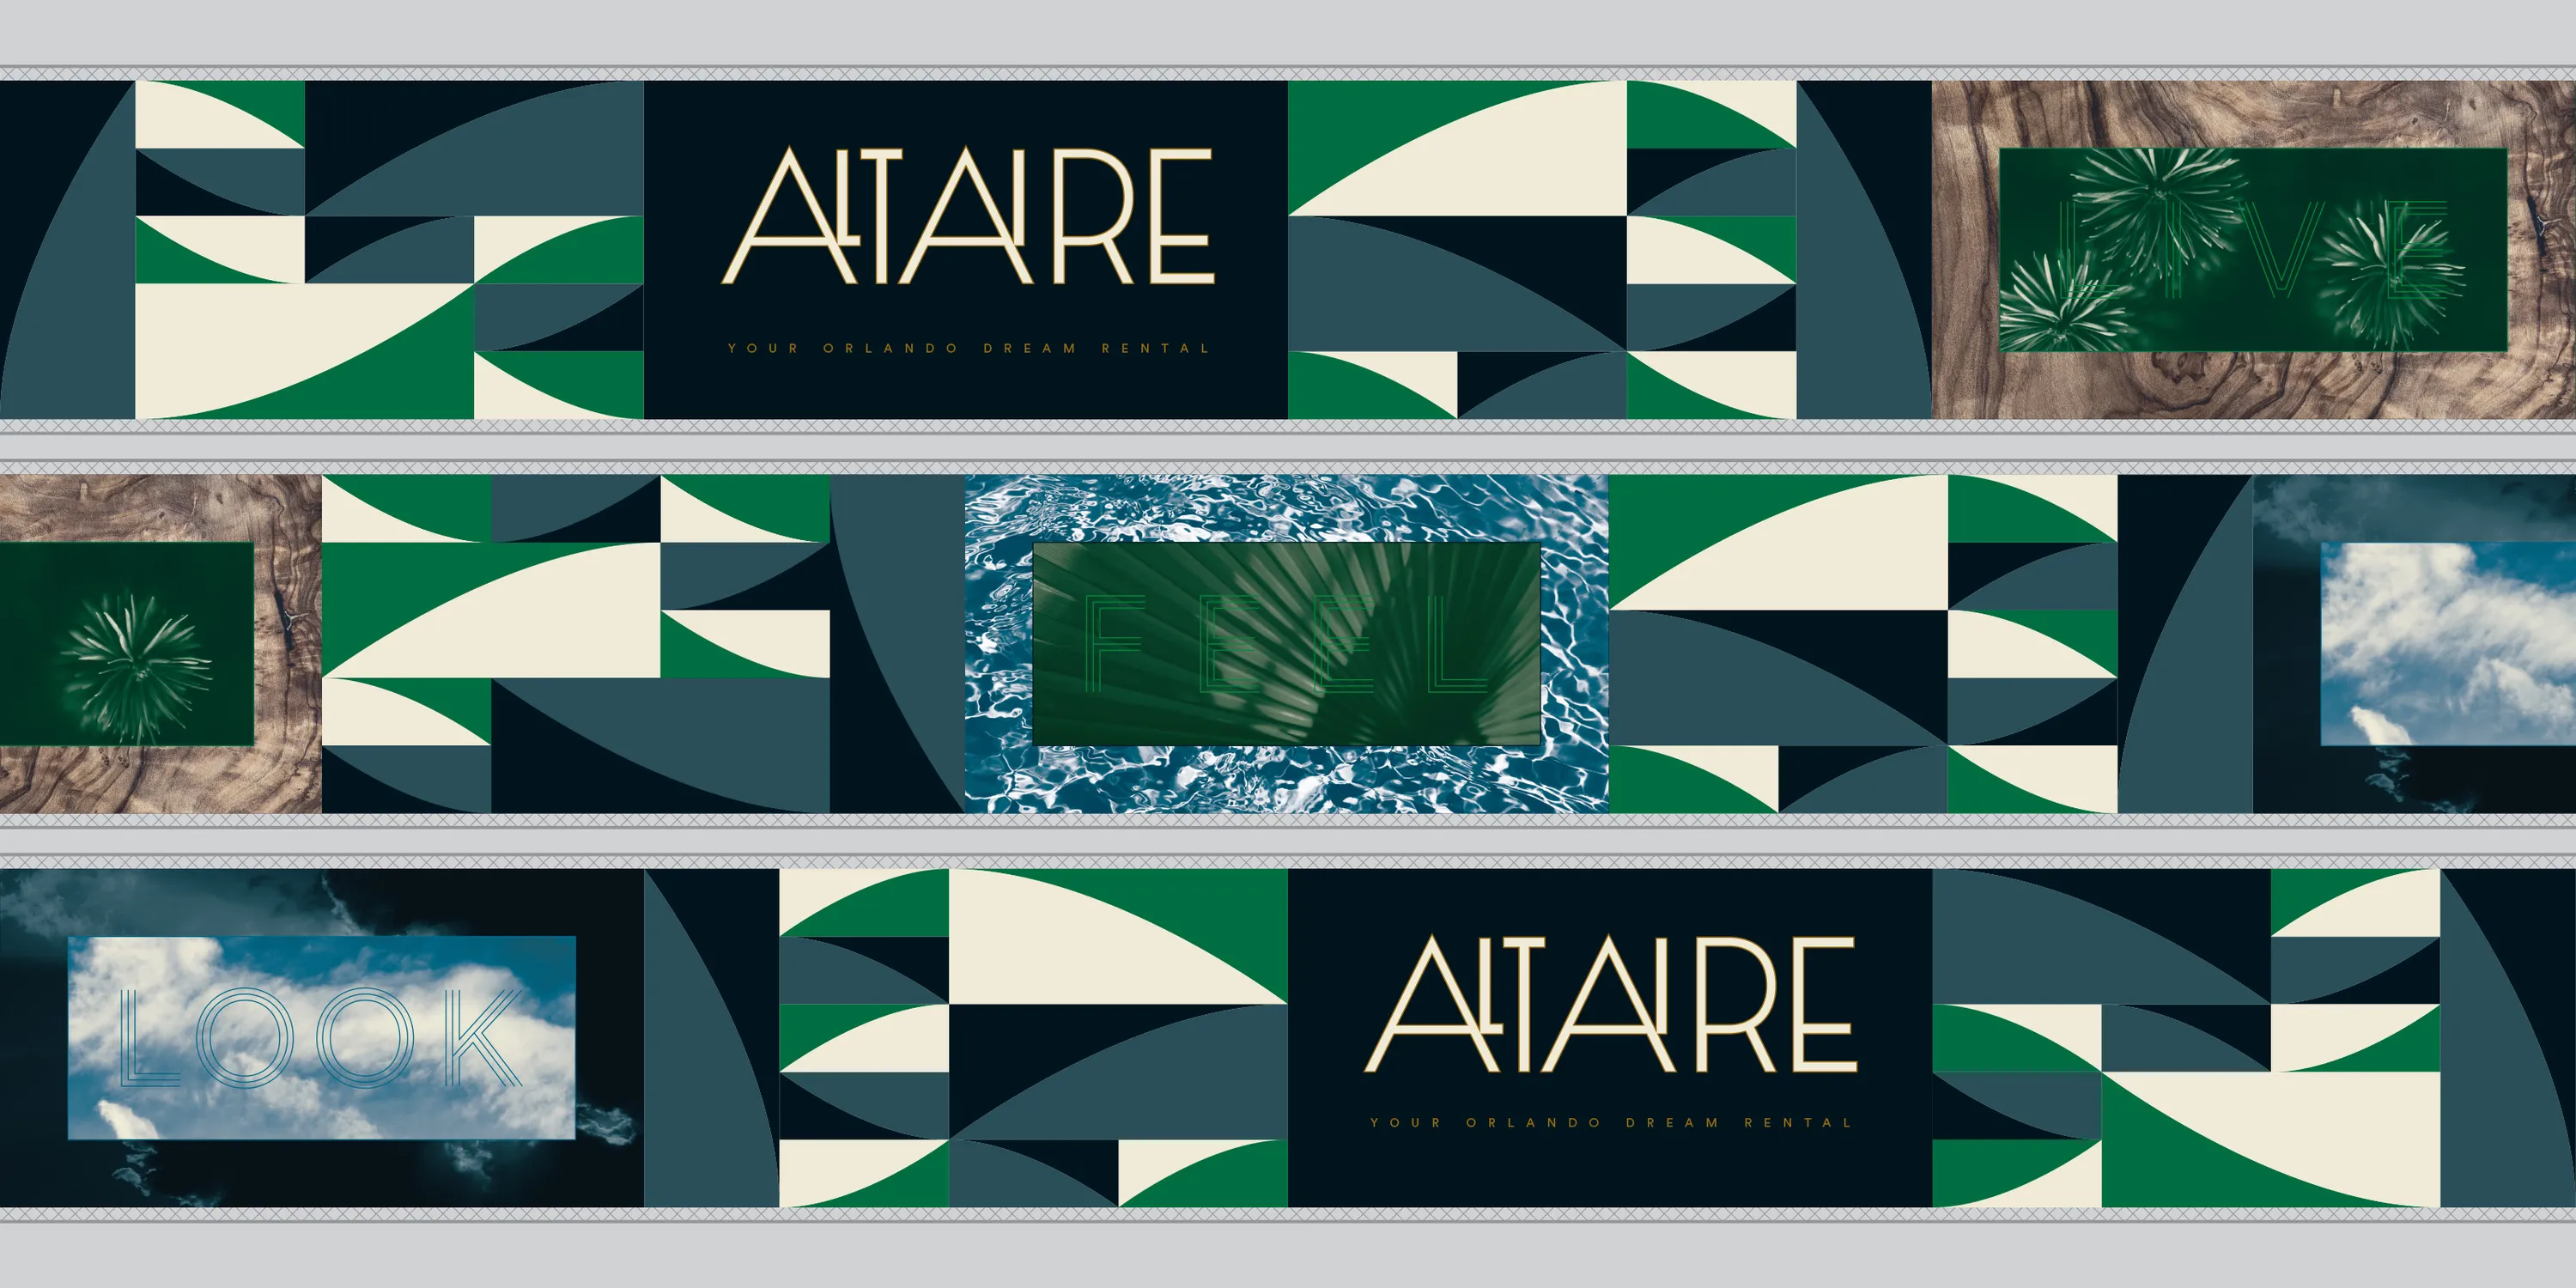 Altaire Logo Brand barricade02 Typography Graphic Design Chicago Span